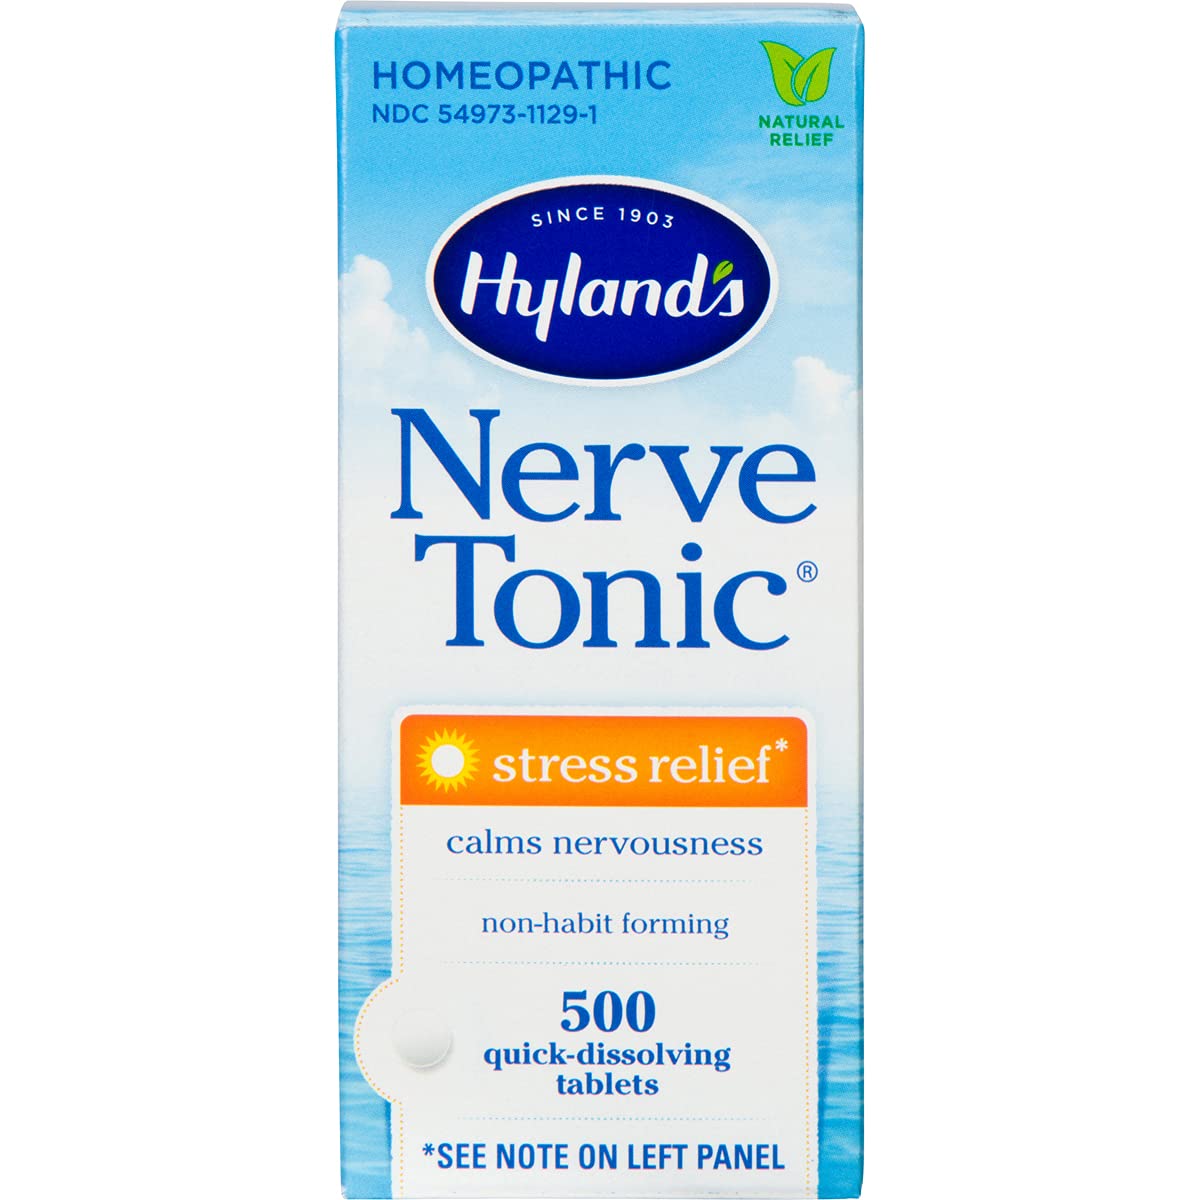 Hyland’s Nerve Tonic Stress Relief Tablets, Natural Relief of Restlessness, Nervousness and Irritability Symptoms, Non-Habit Forming, 500 Count